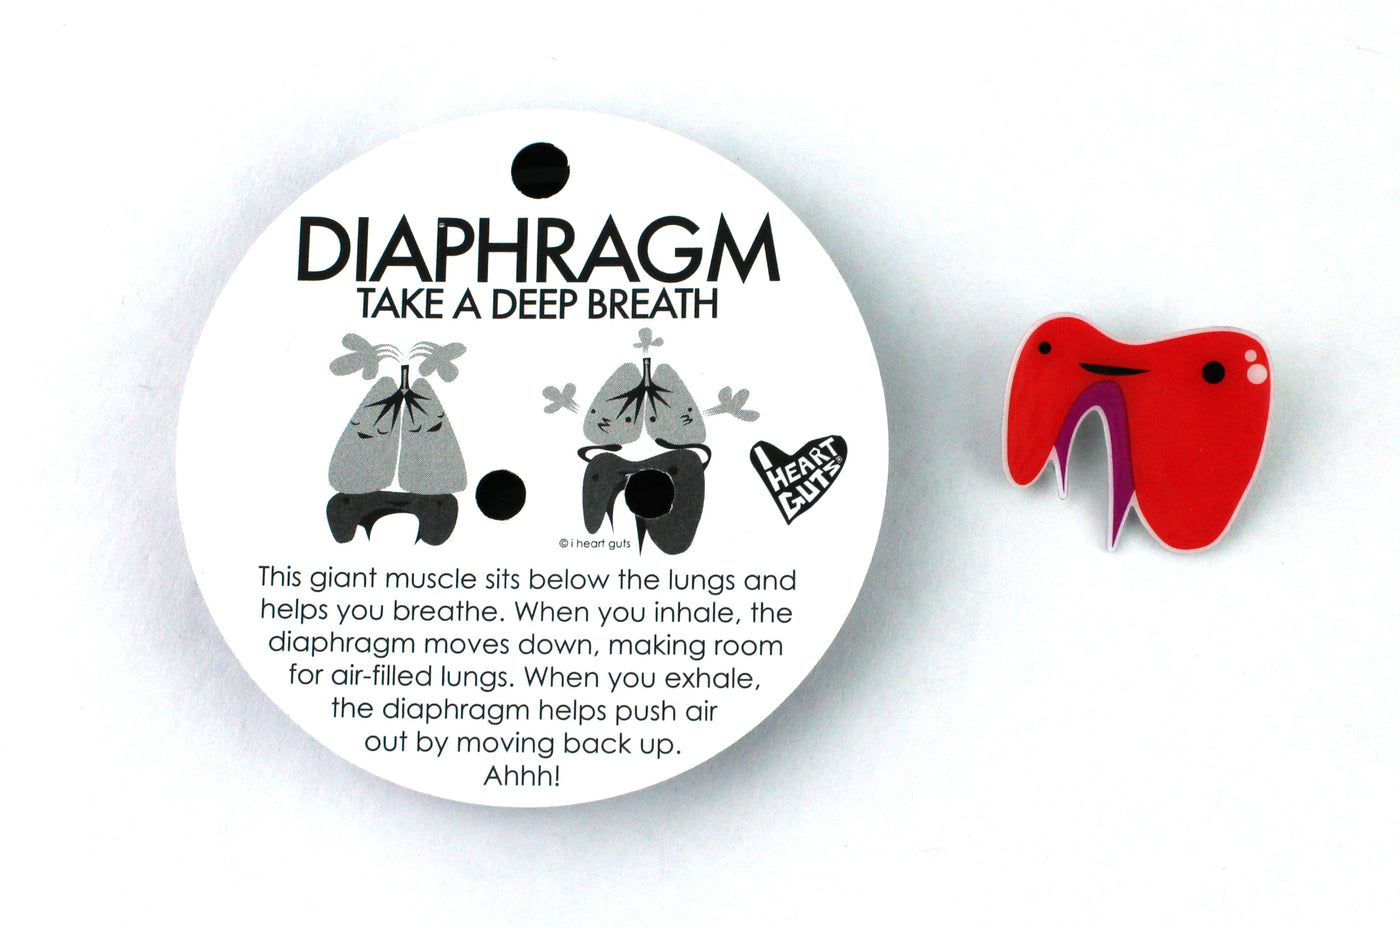 Diaphragm Lapel Pin - Cute Diaphragm Character Pin - Respiratory Therapist Pins & Gifts - 